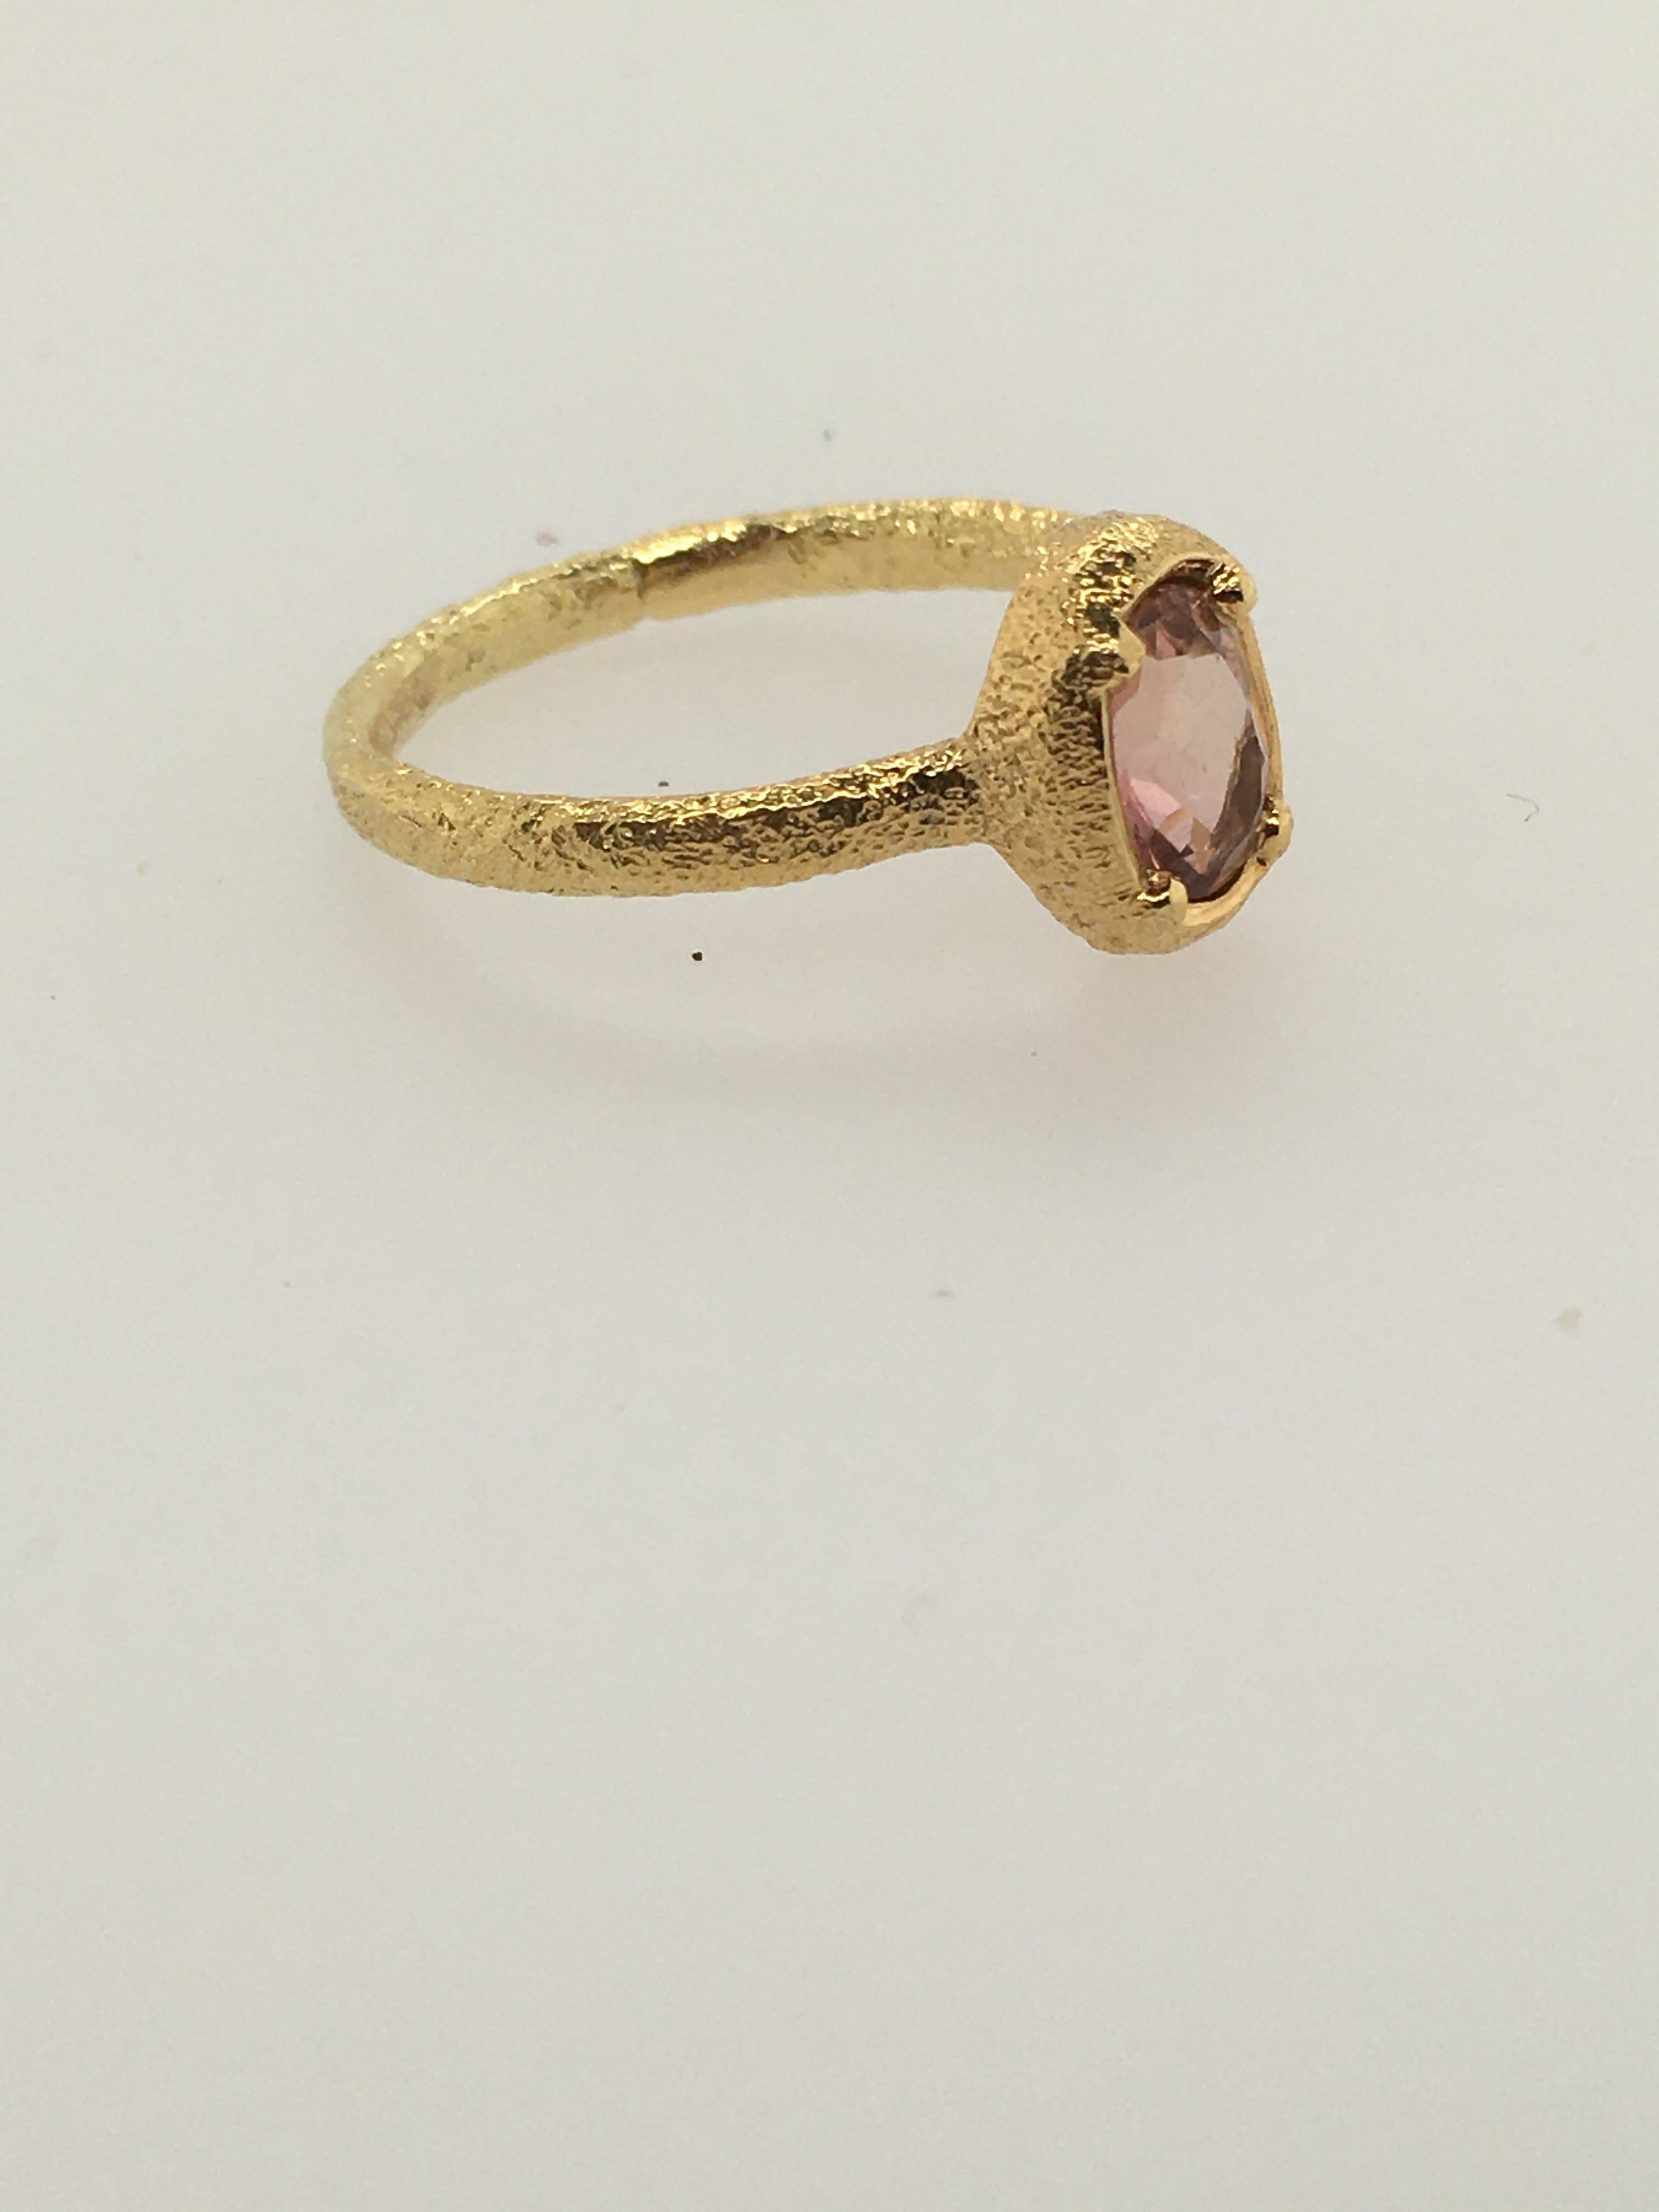 Lovely hammered 18K Yellow Gold Ring with oval Peach Tourmaline. Tourmaline measures 7 mm x 5 mm.  Hand-fabricated by well-known Maine jeweler, Patricia Daunis in her Portland studio.   Part of her custom 18K Yellow Gold ATUIK collection, this ring